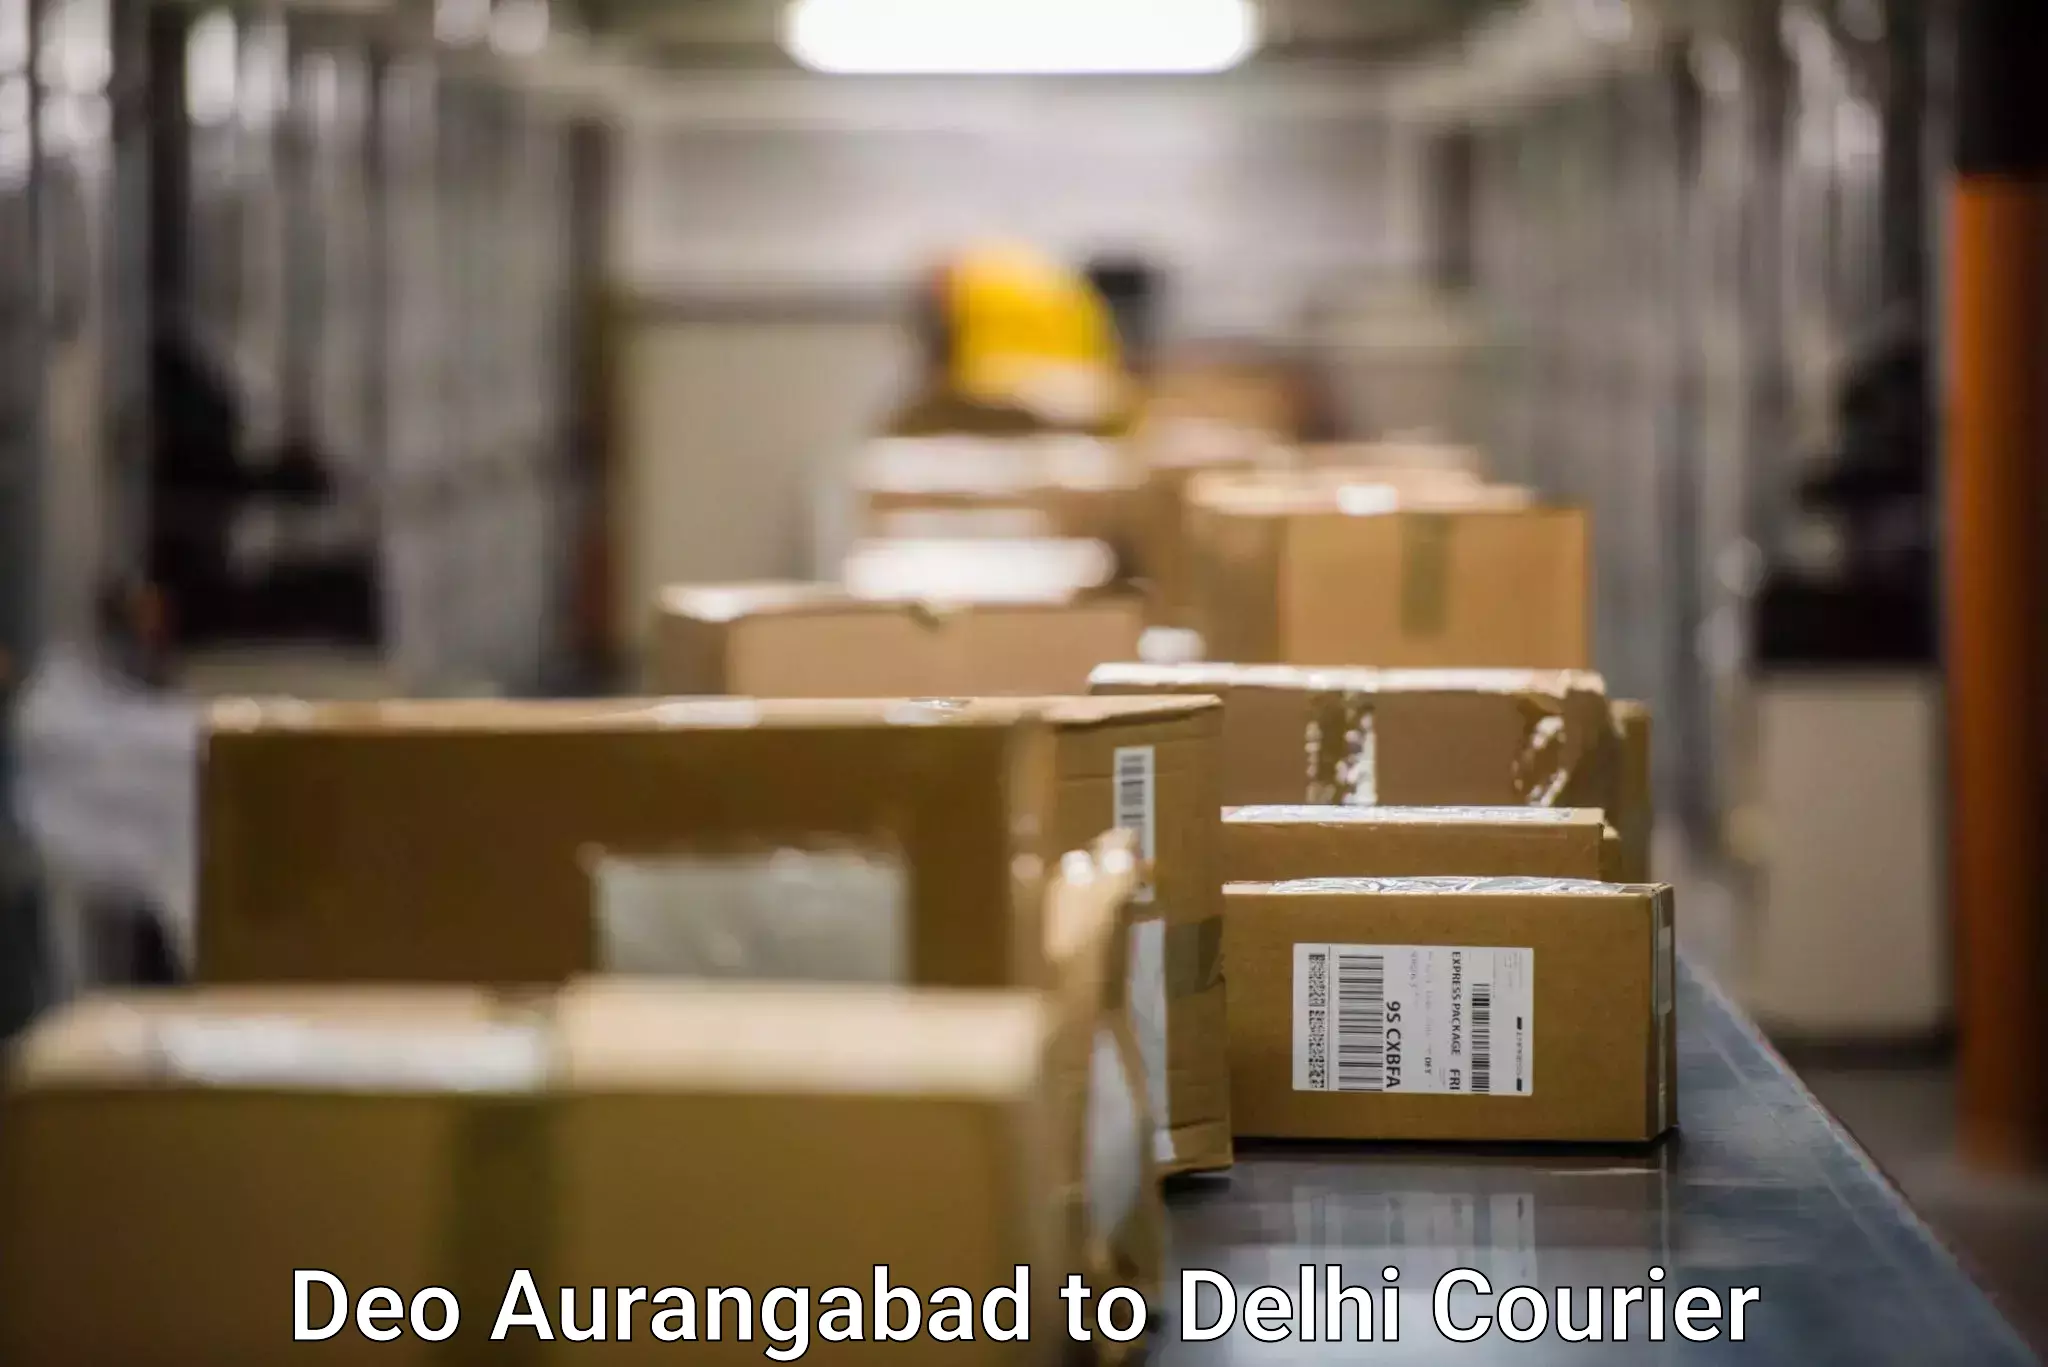 Supply chain delivery Deo Aurangabad to Lodhi Road